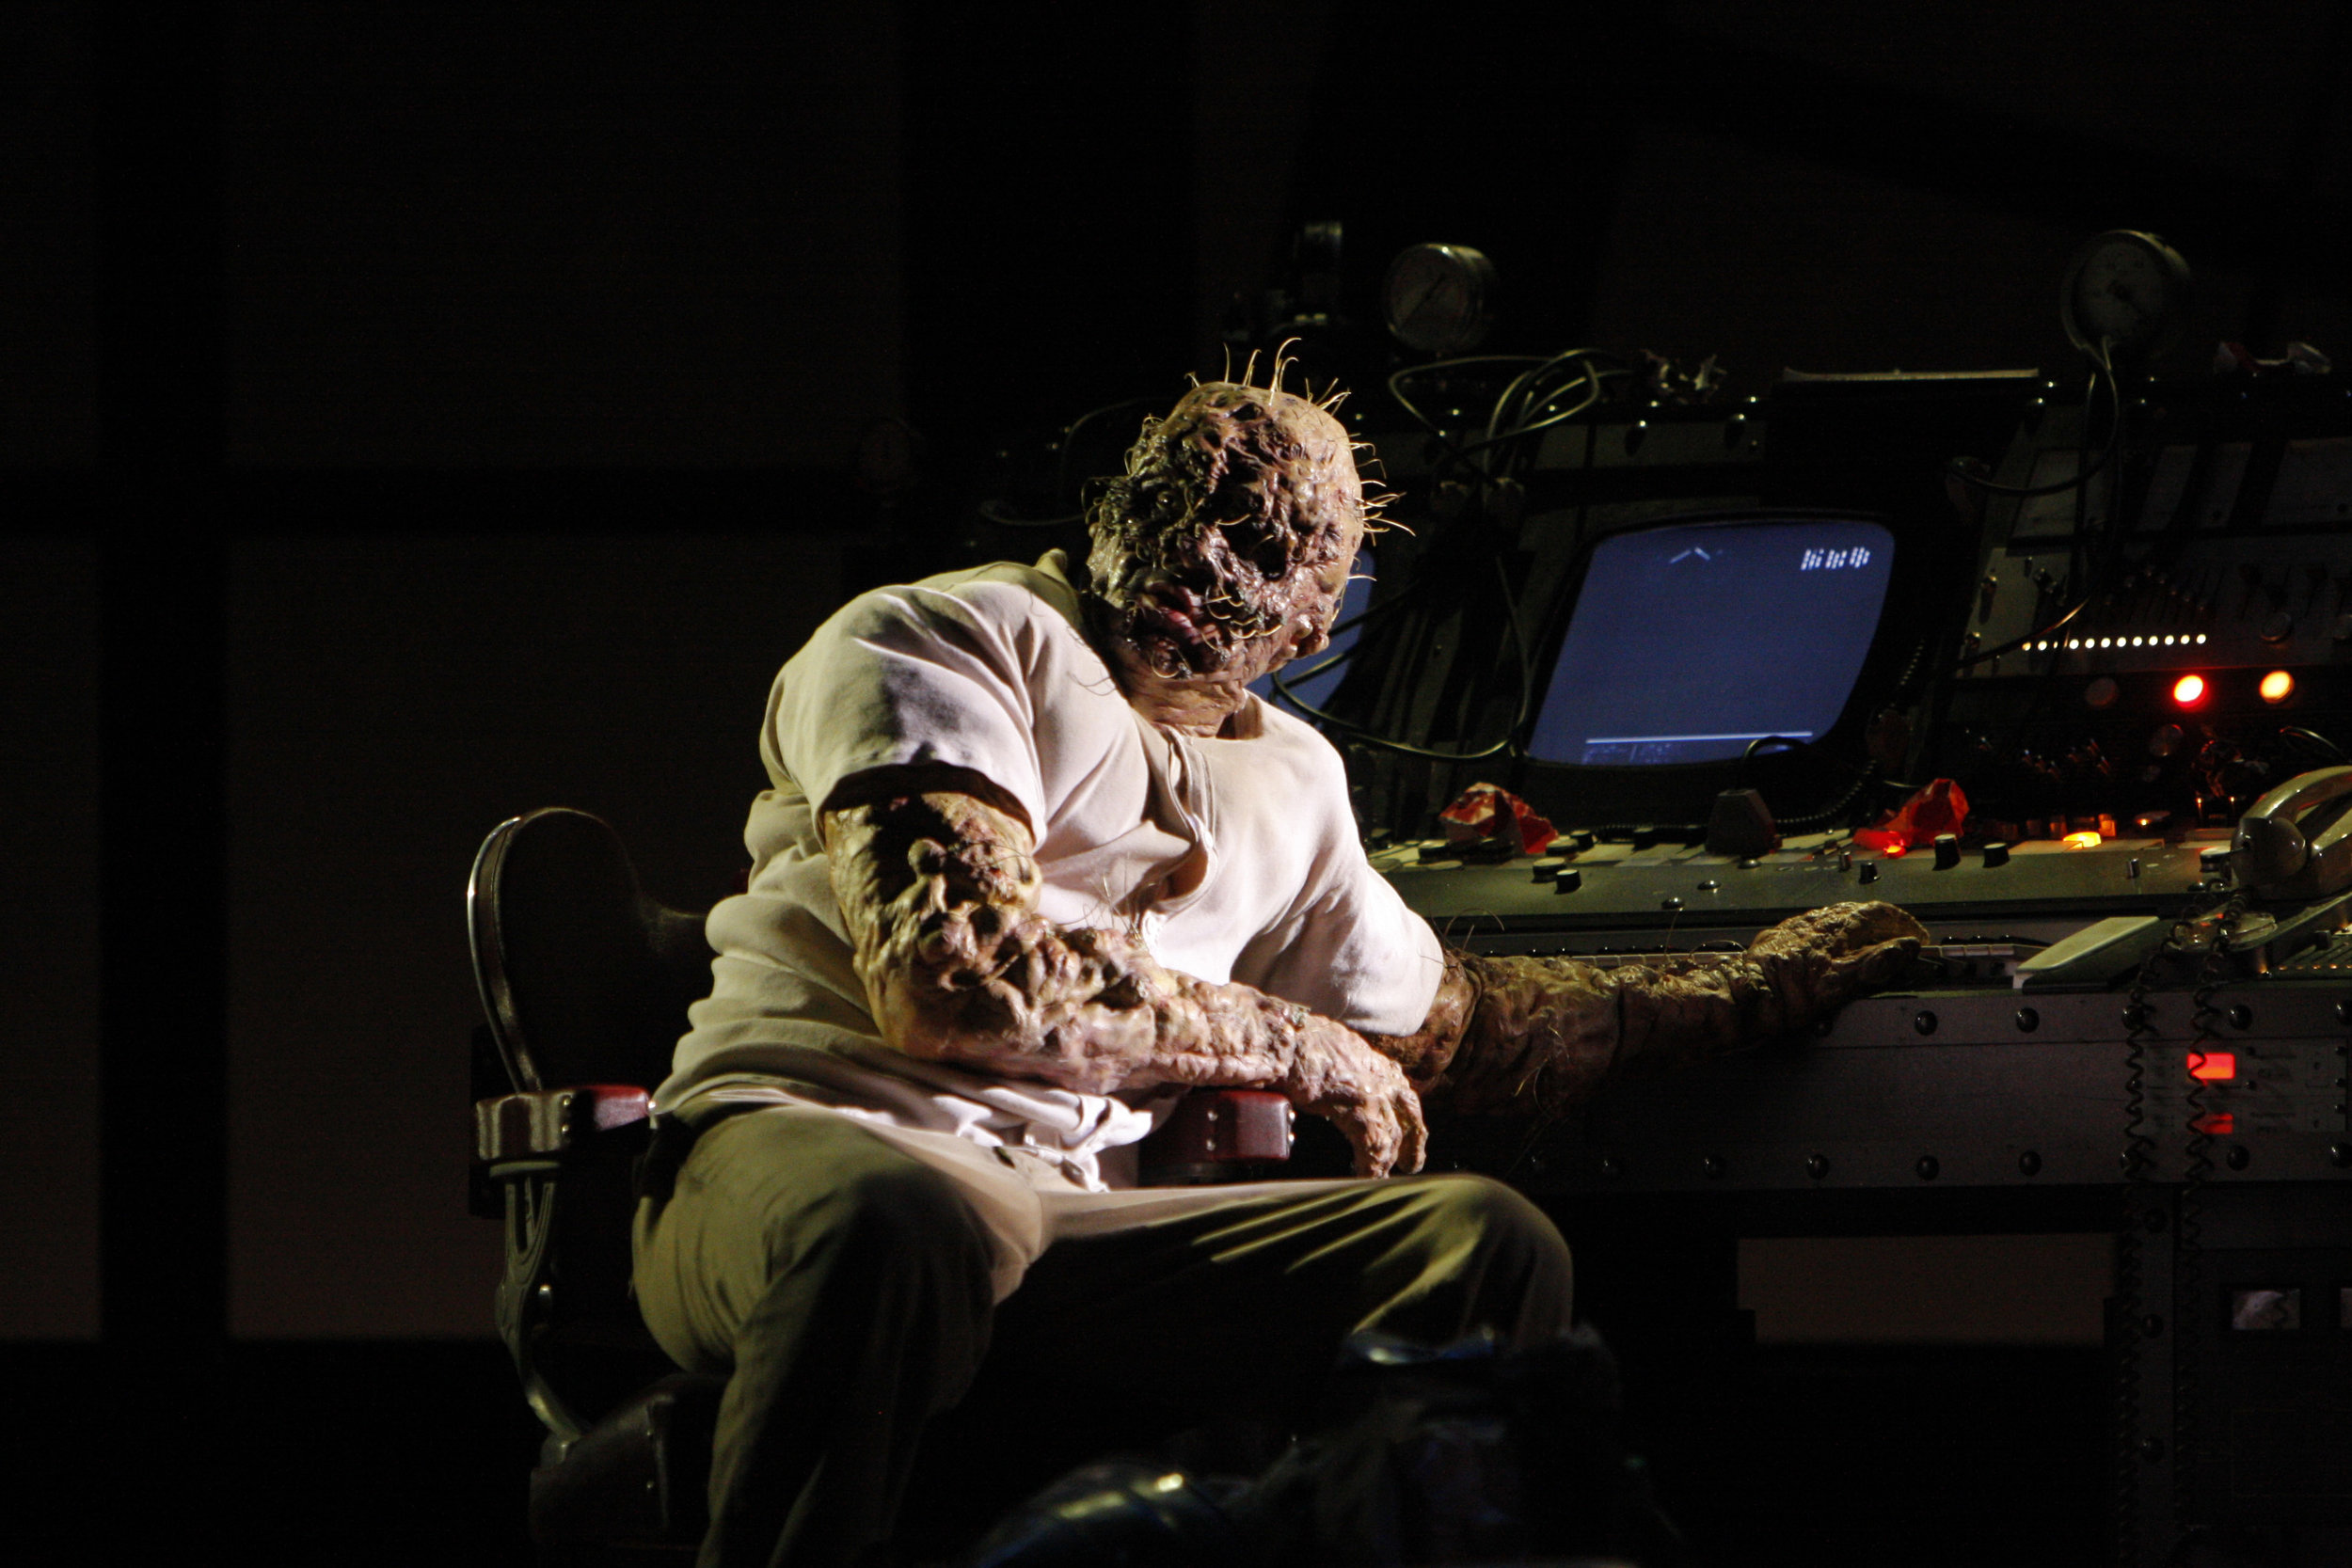 Daniel Okulitch as Seth Brundle in The Fly. Photo by Robert Millard for the Los Angeles Opera, 2008